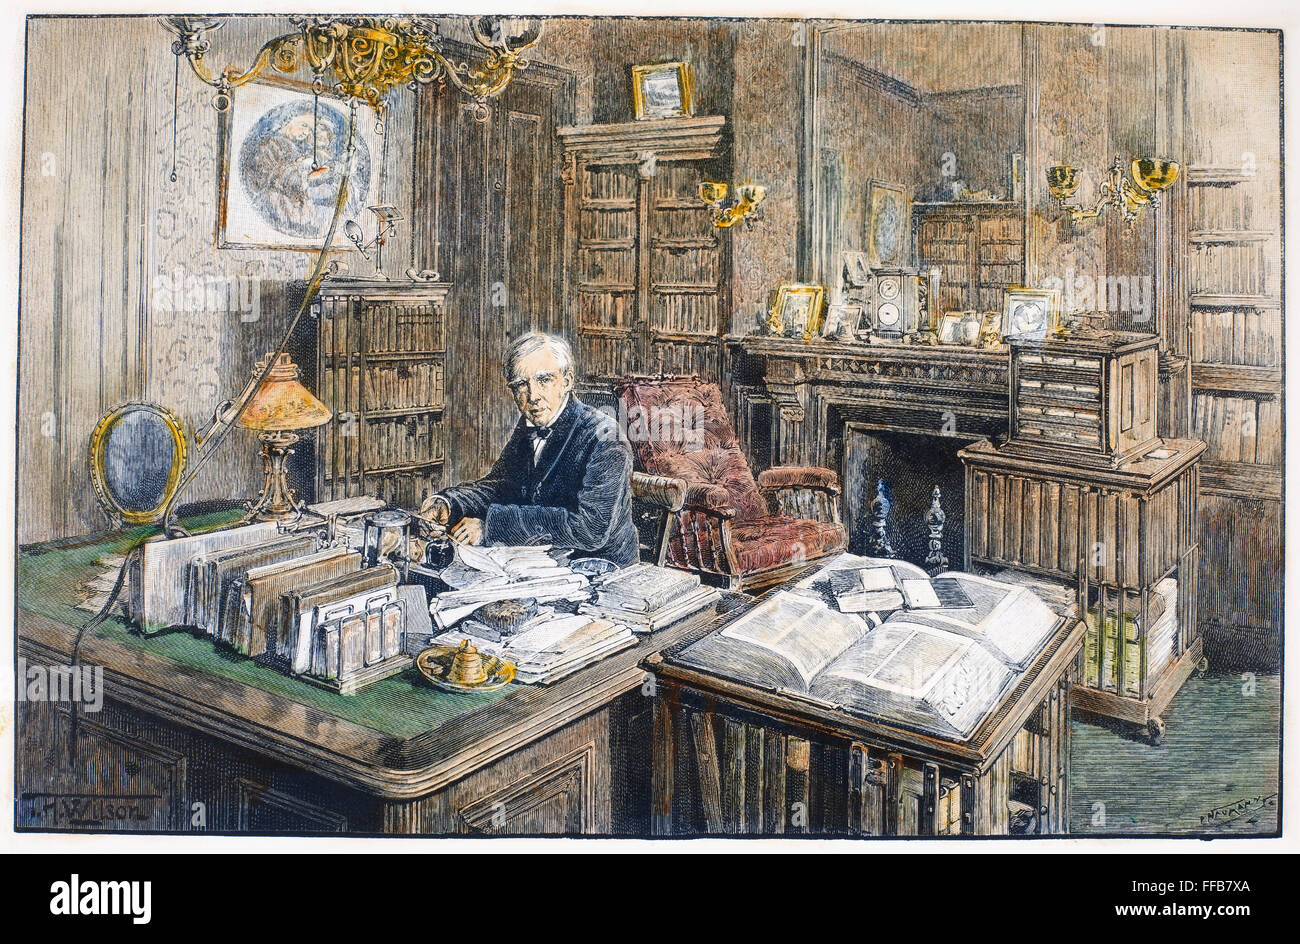 OLIVER WENDELL HOLMES /n(1809-1894). American physician and man of letters. Holmes in his study at his house on Beacon Street, Boston, Massachusetts. Wood engraving, English, 1894. Stock Photo